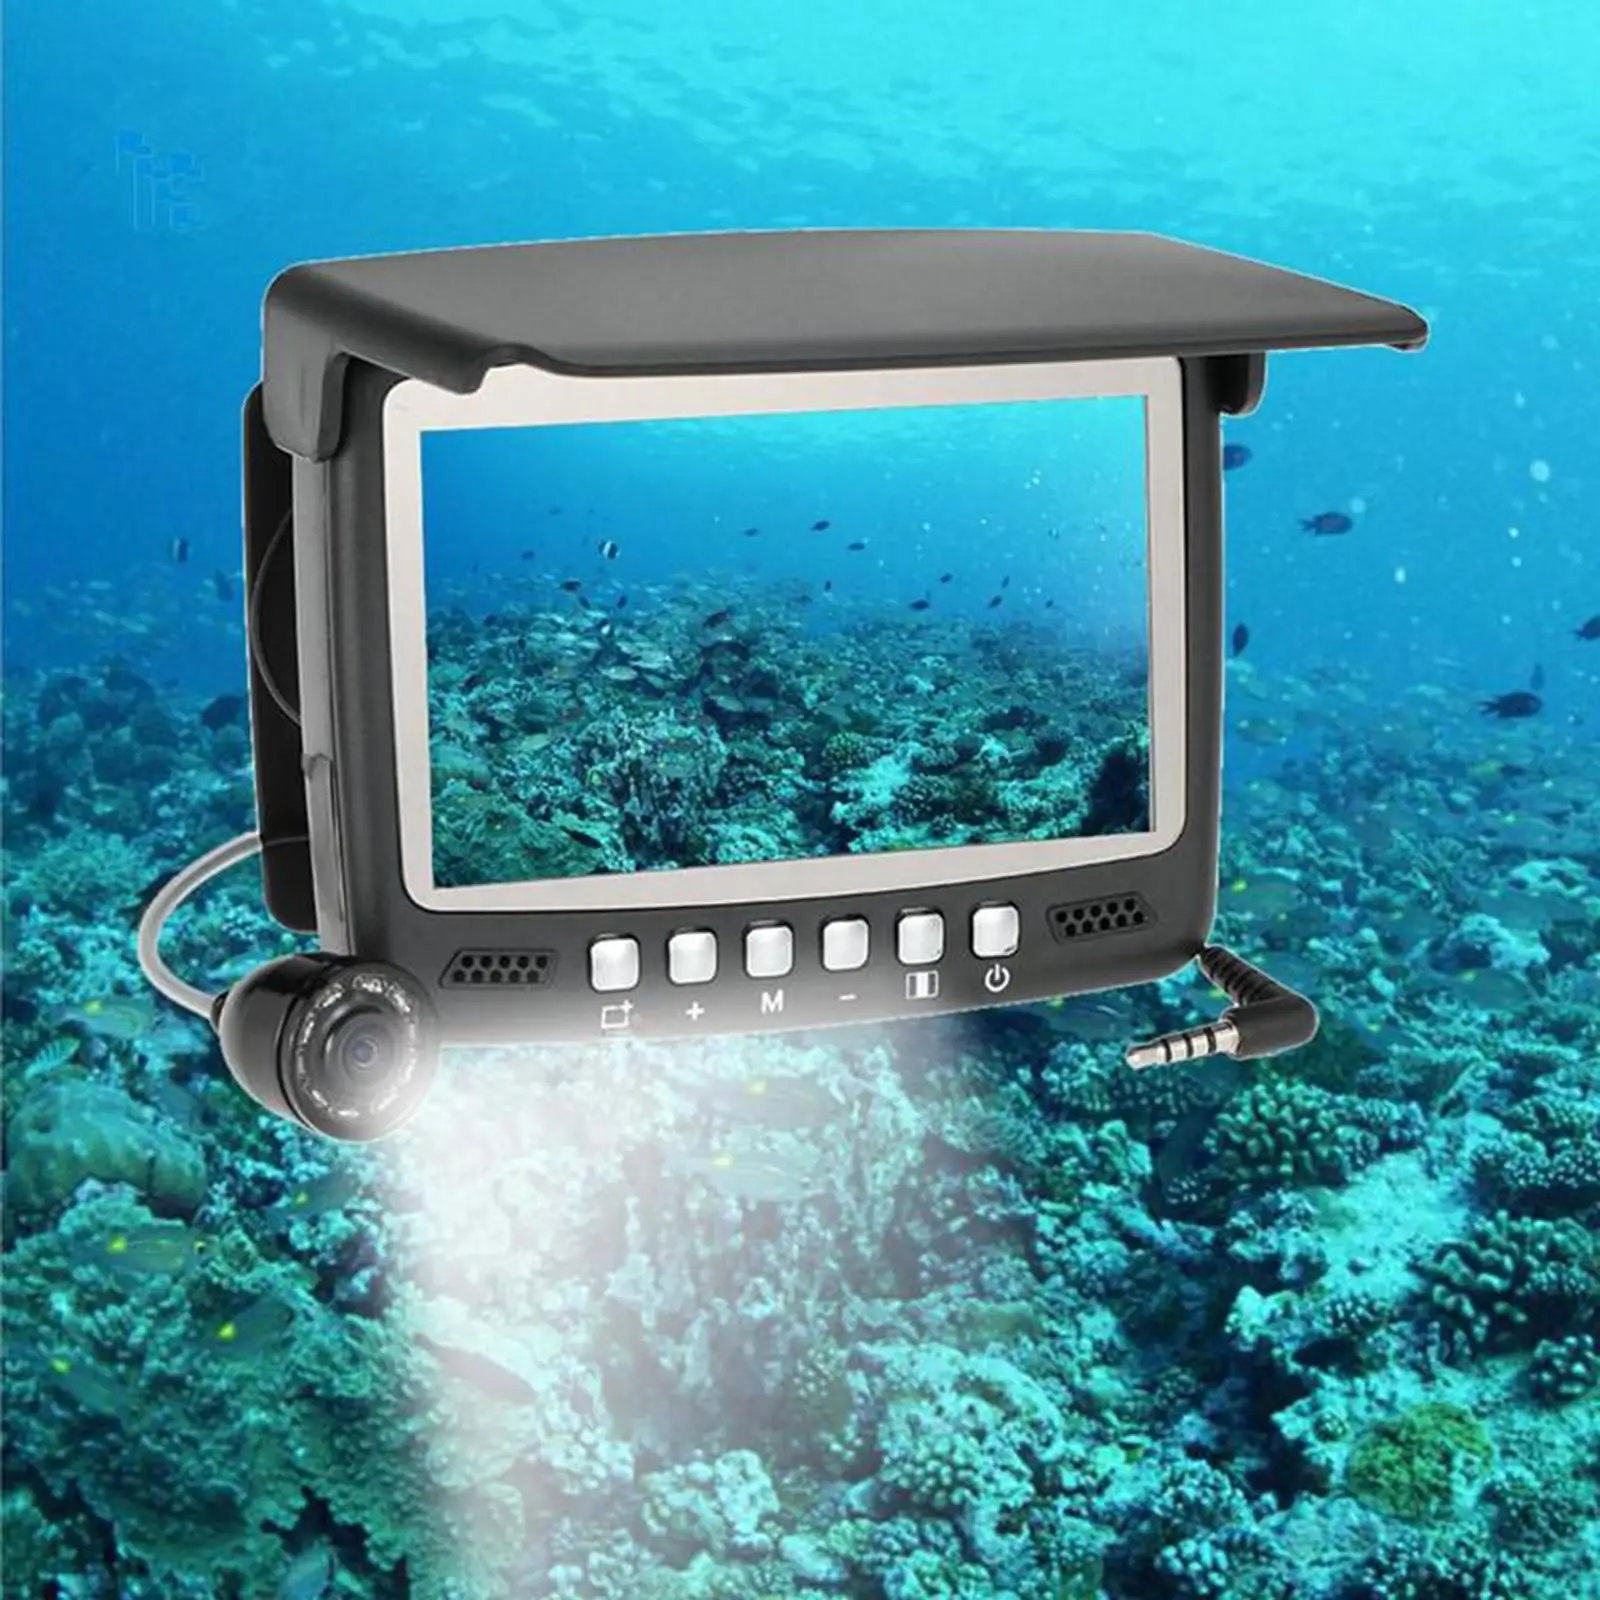 Underwater Fishing Camera DVR Fish Infrared LED Fishing Video Camera with 4.3 inch Monitor for Kayak Fishing